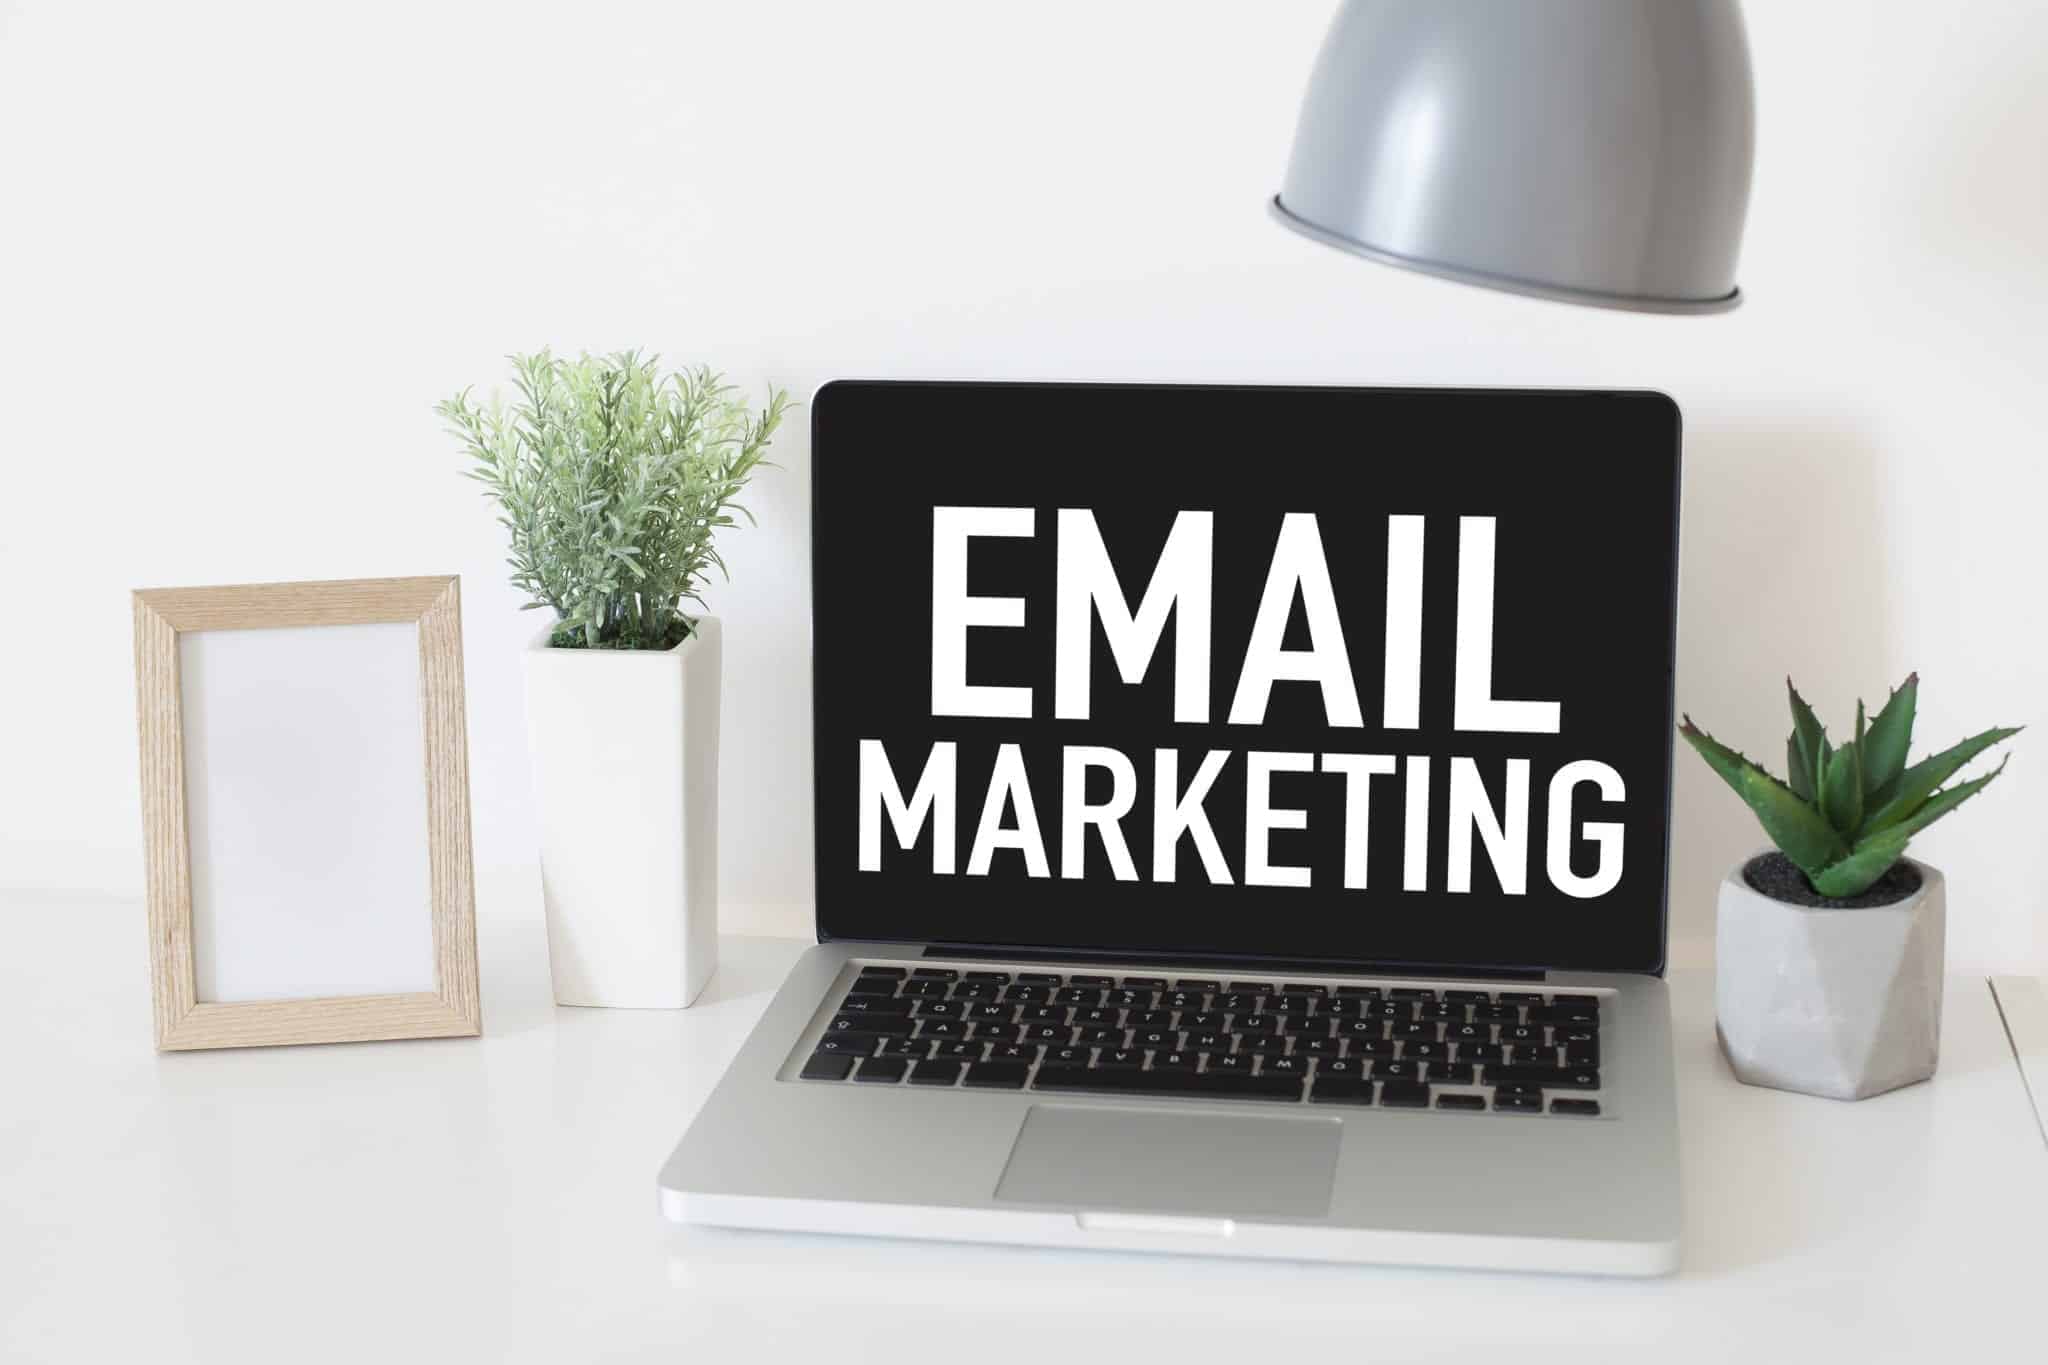 Increase conversions in your email marketing with our top tips.